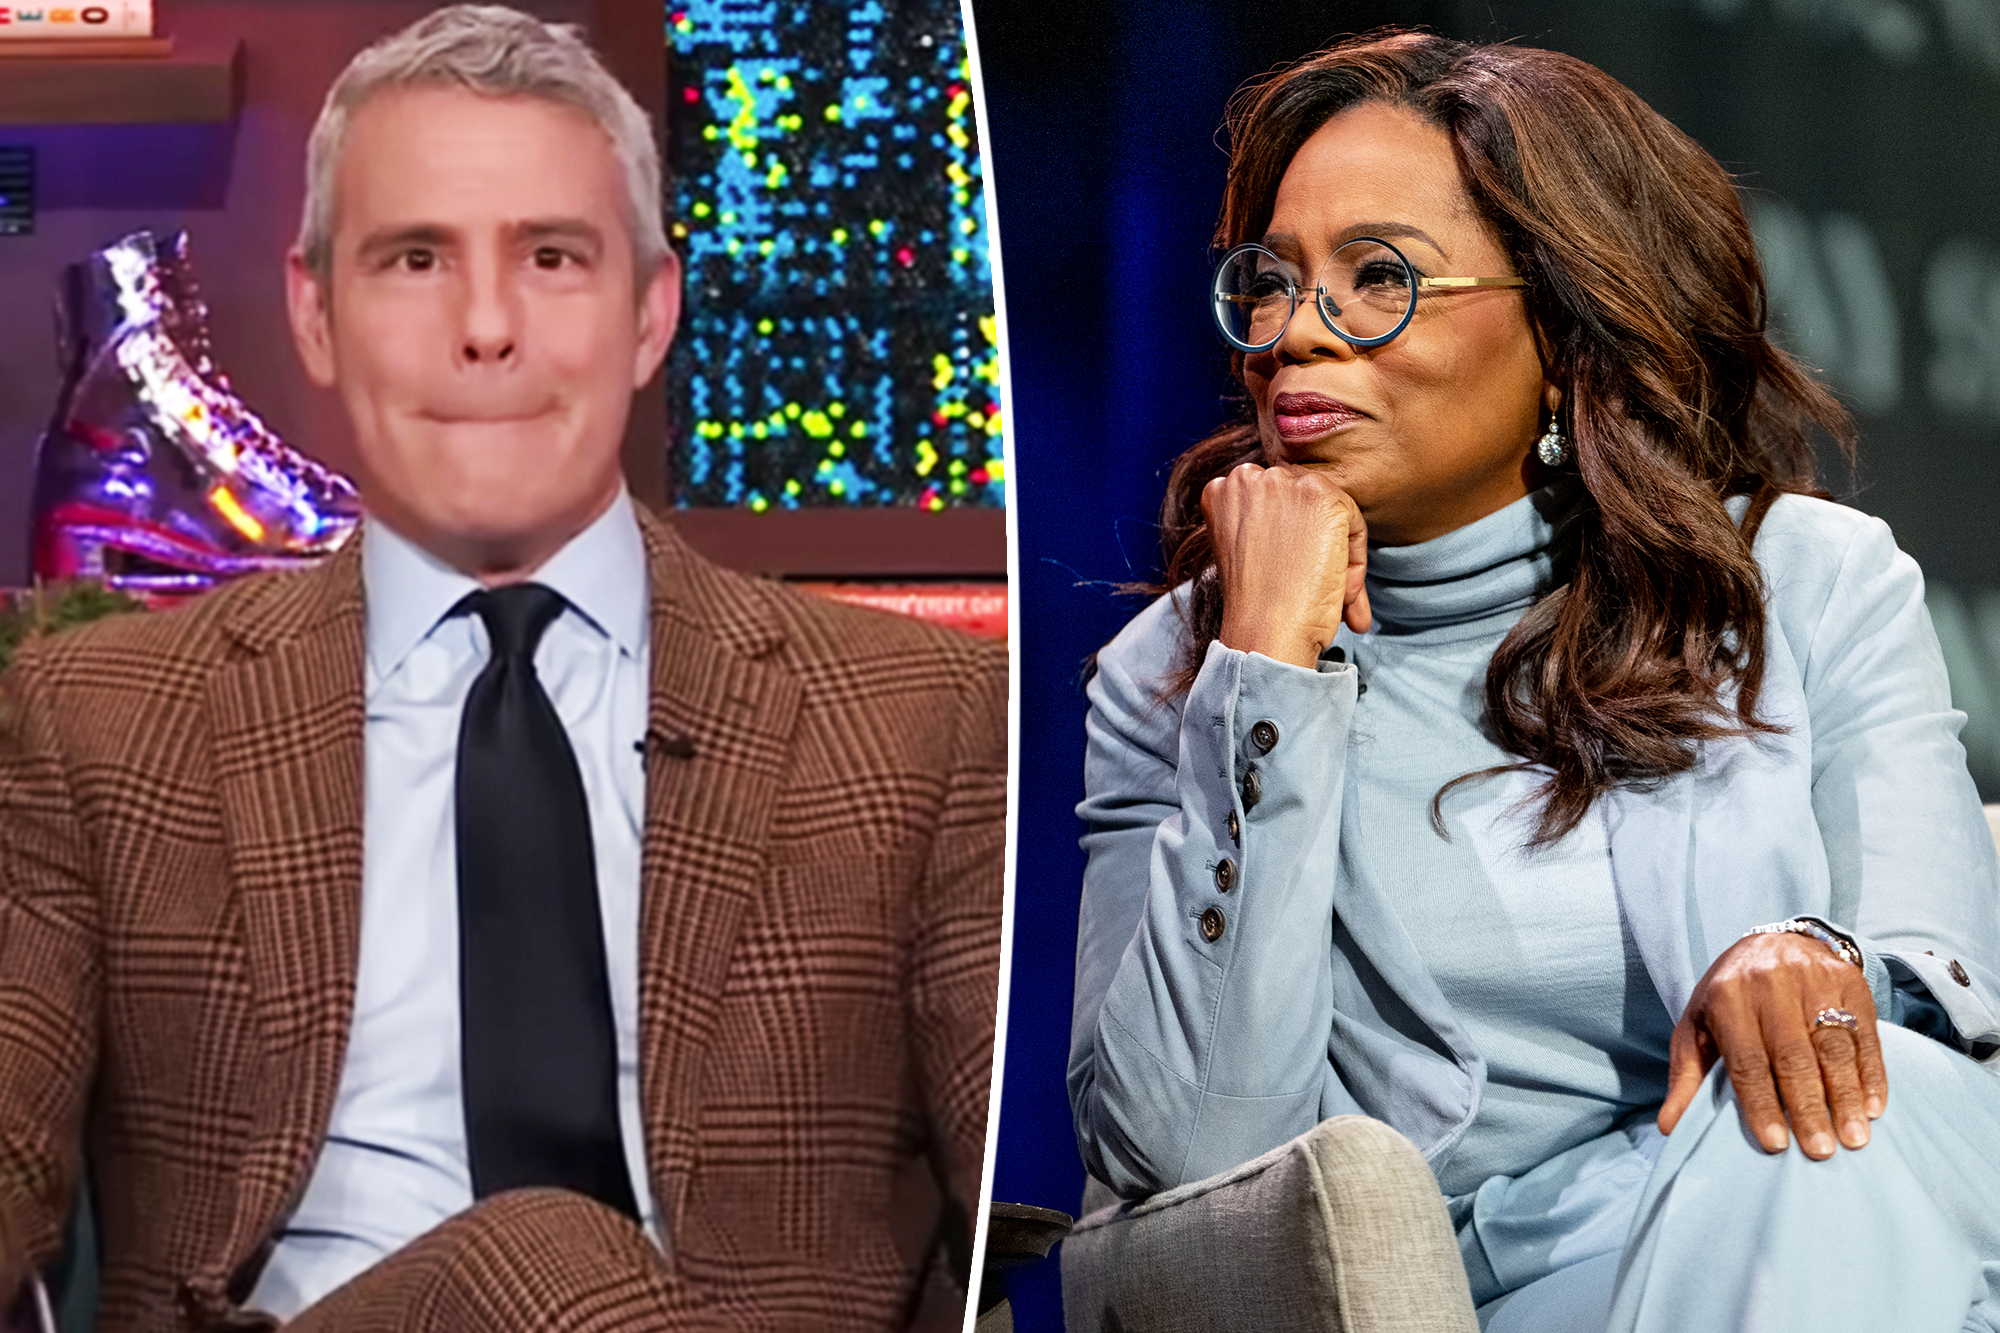 Andy Cohen Reflects on a Regretful Question to Oprah Winfrey